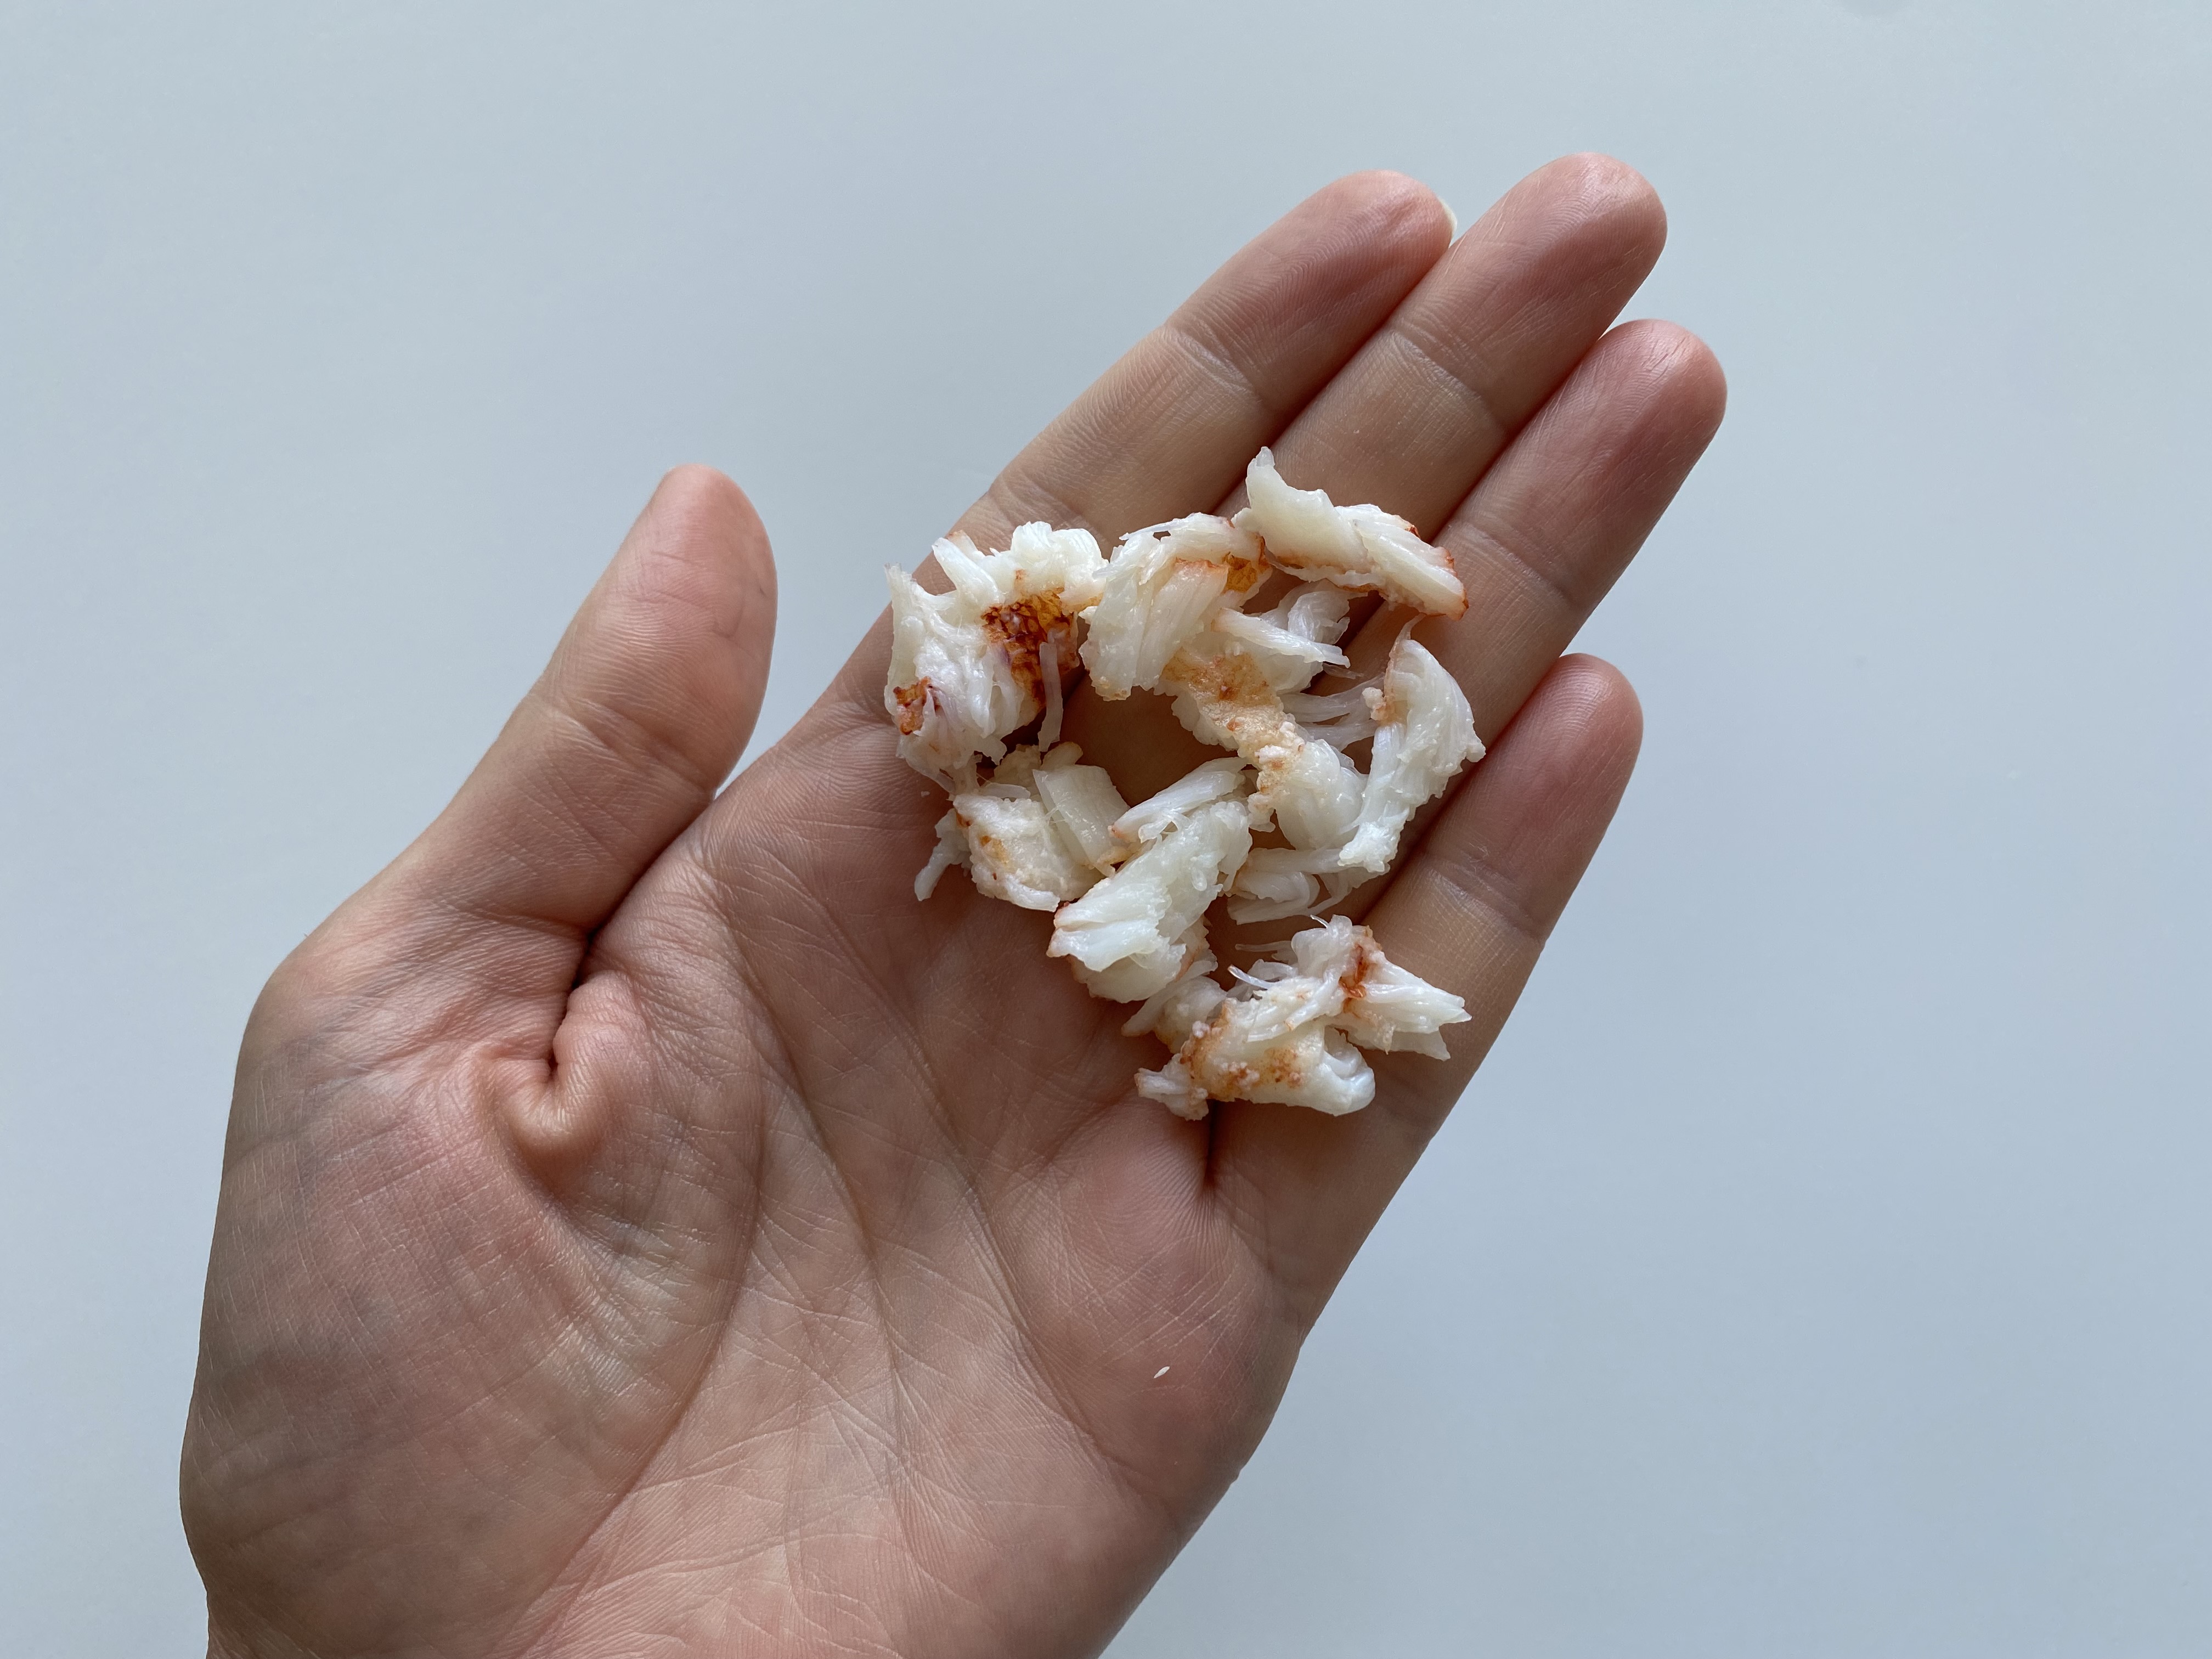 a hand holding a small pile of shredded pieces of lobster meat